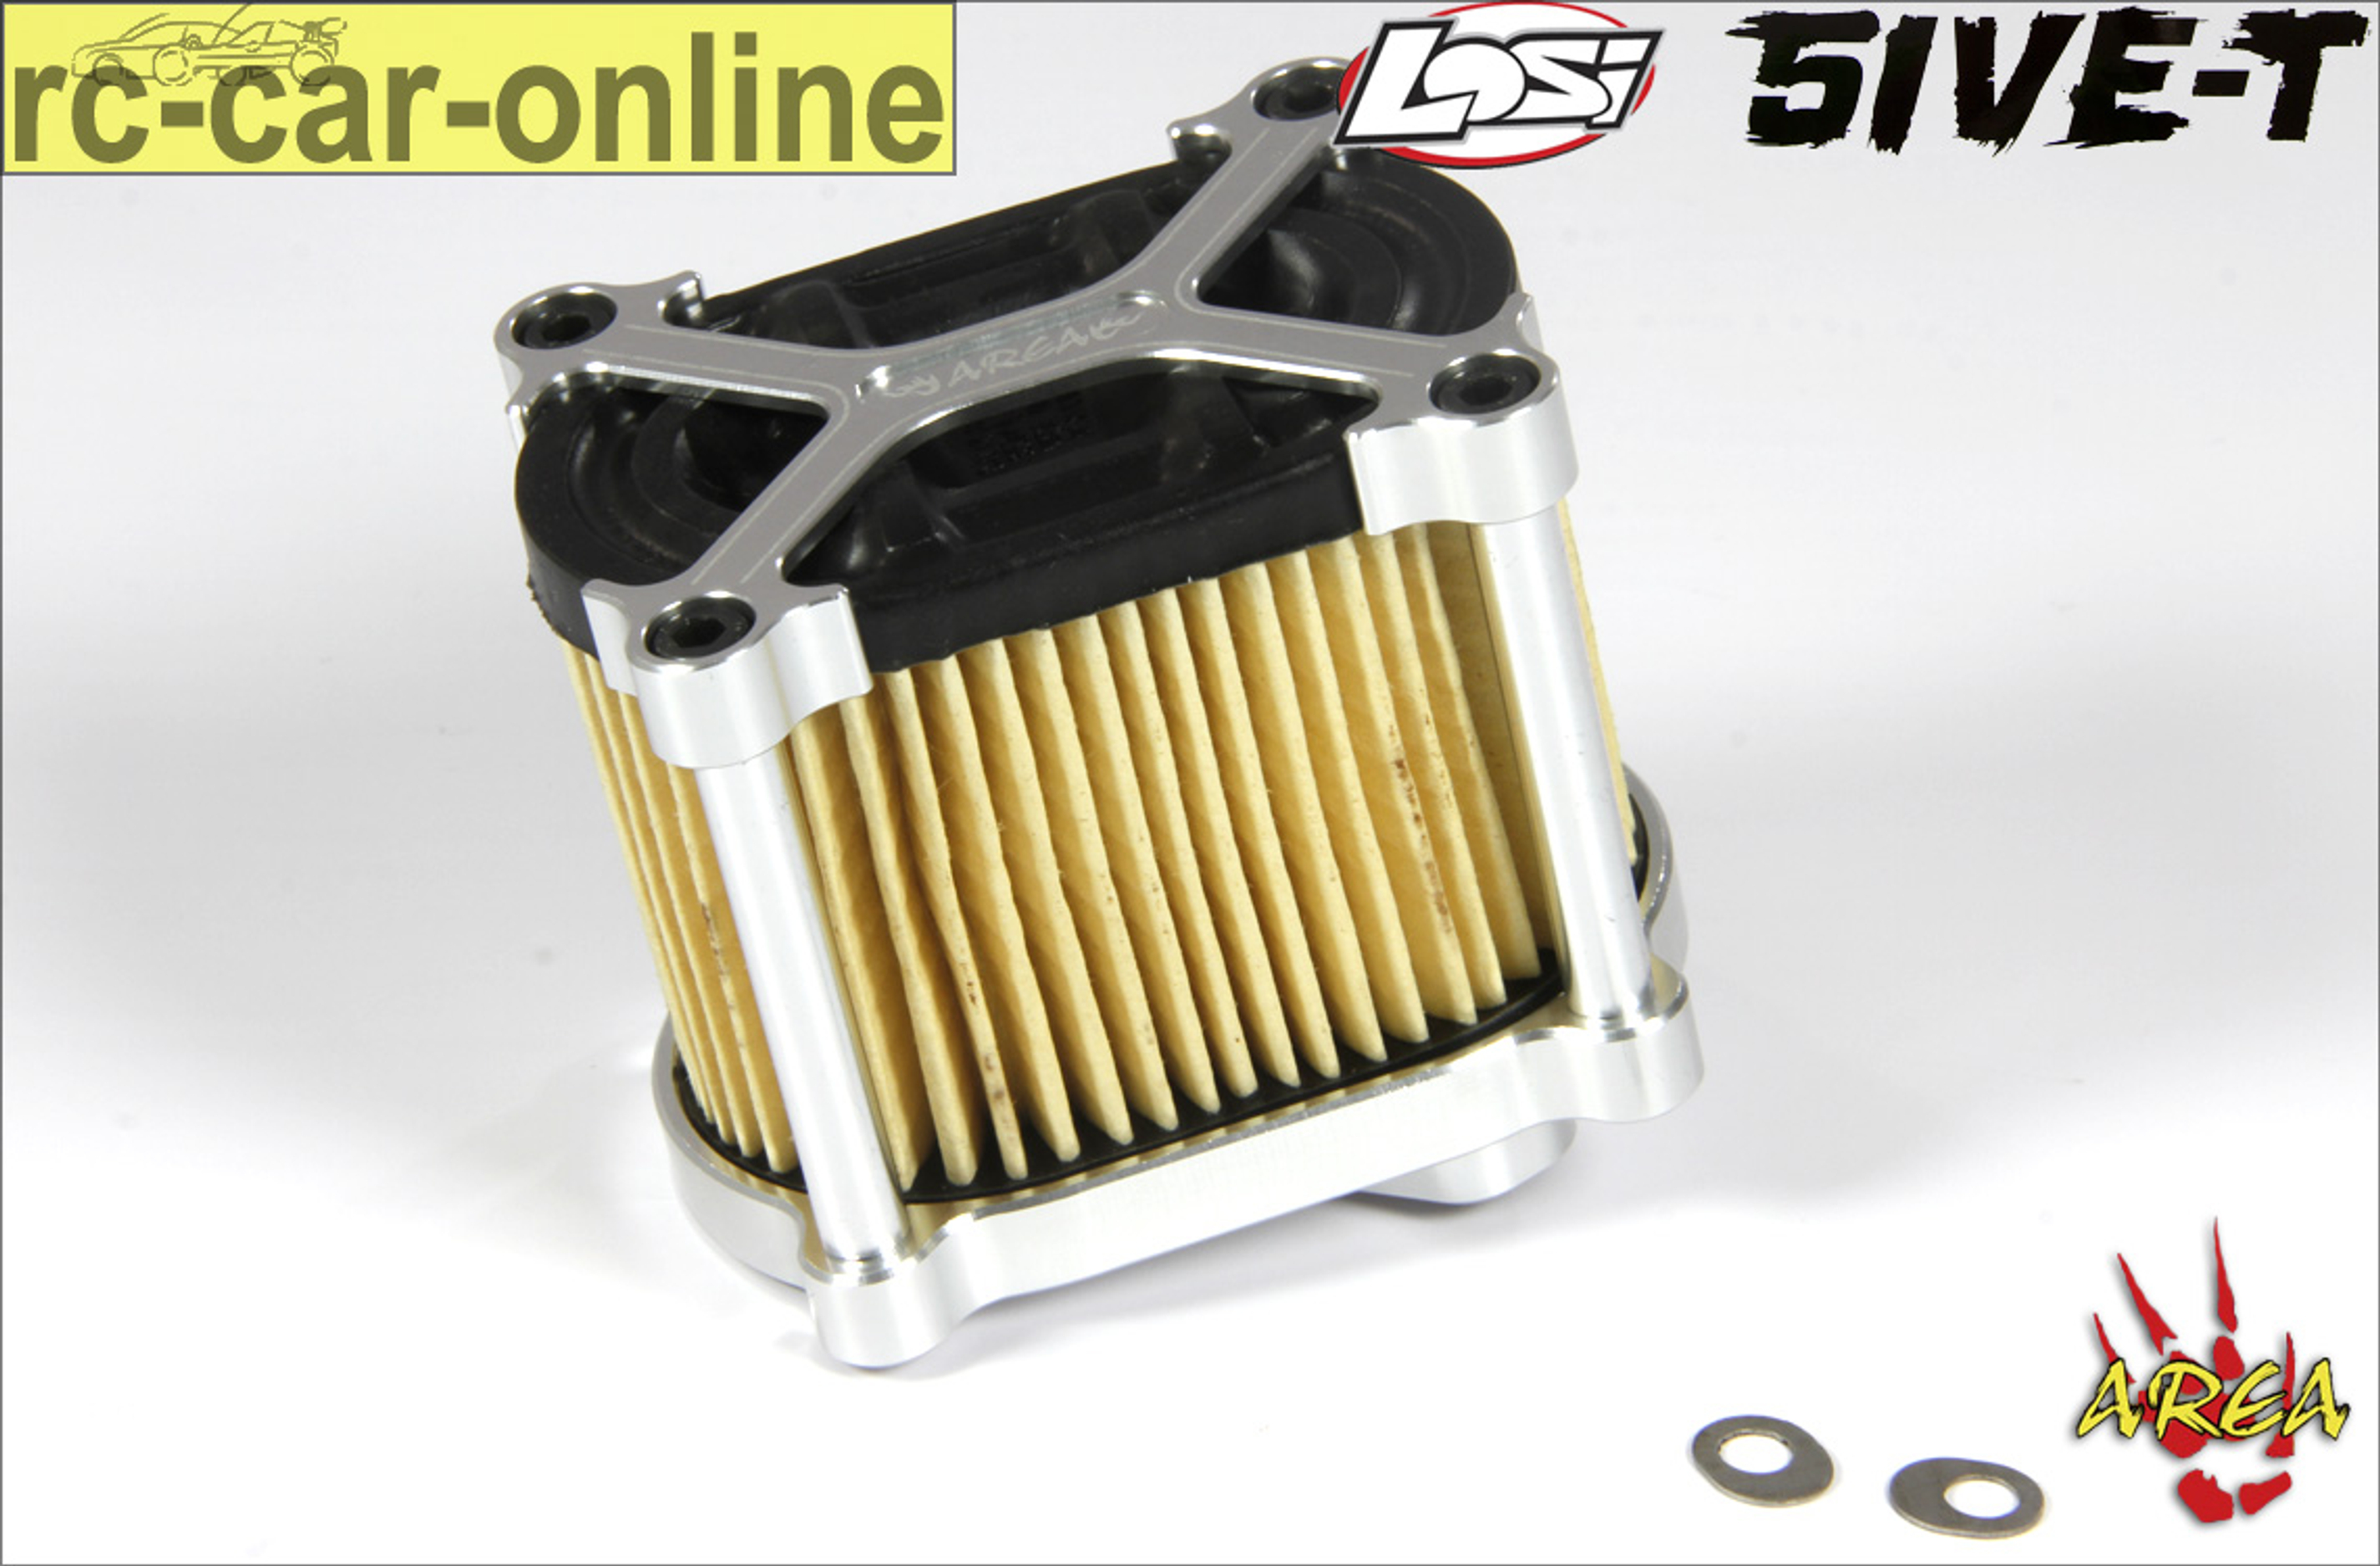 AREA-5T-028/029 Air filter system Losi 5ive-T and Mini, with filter elements